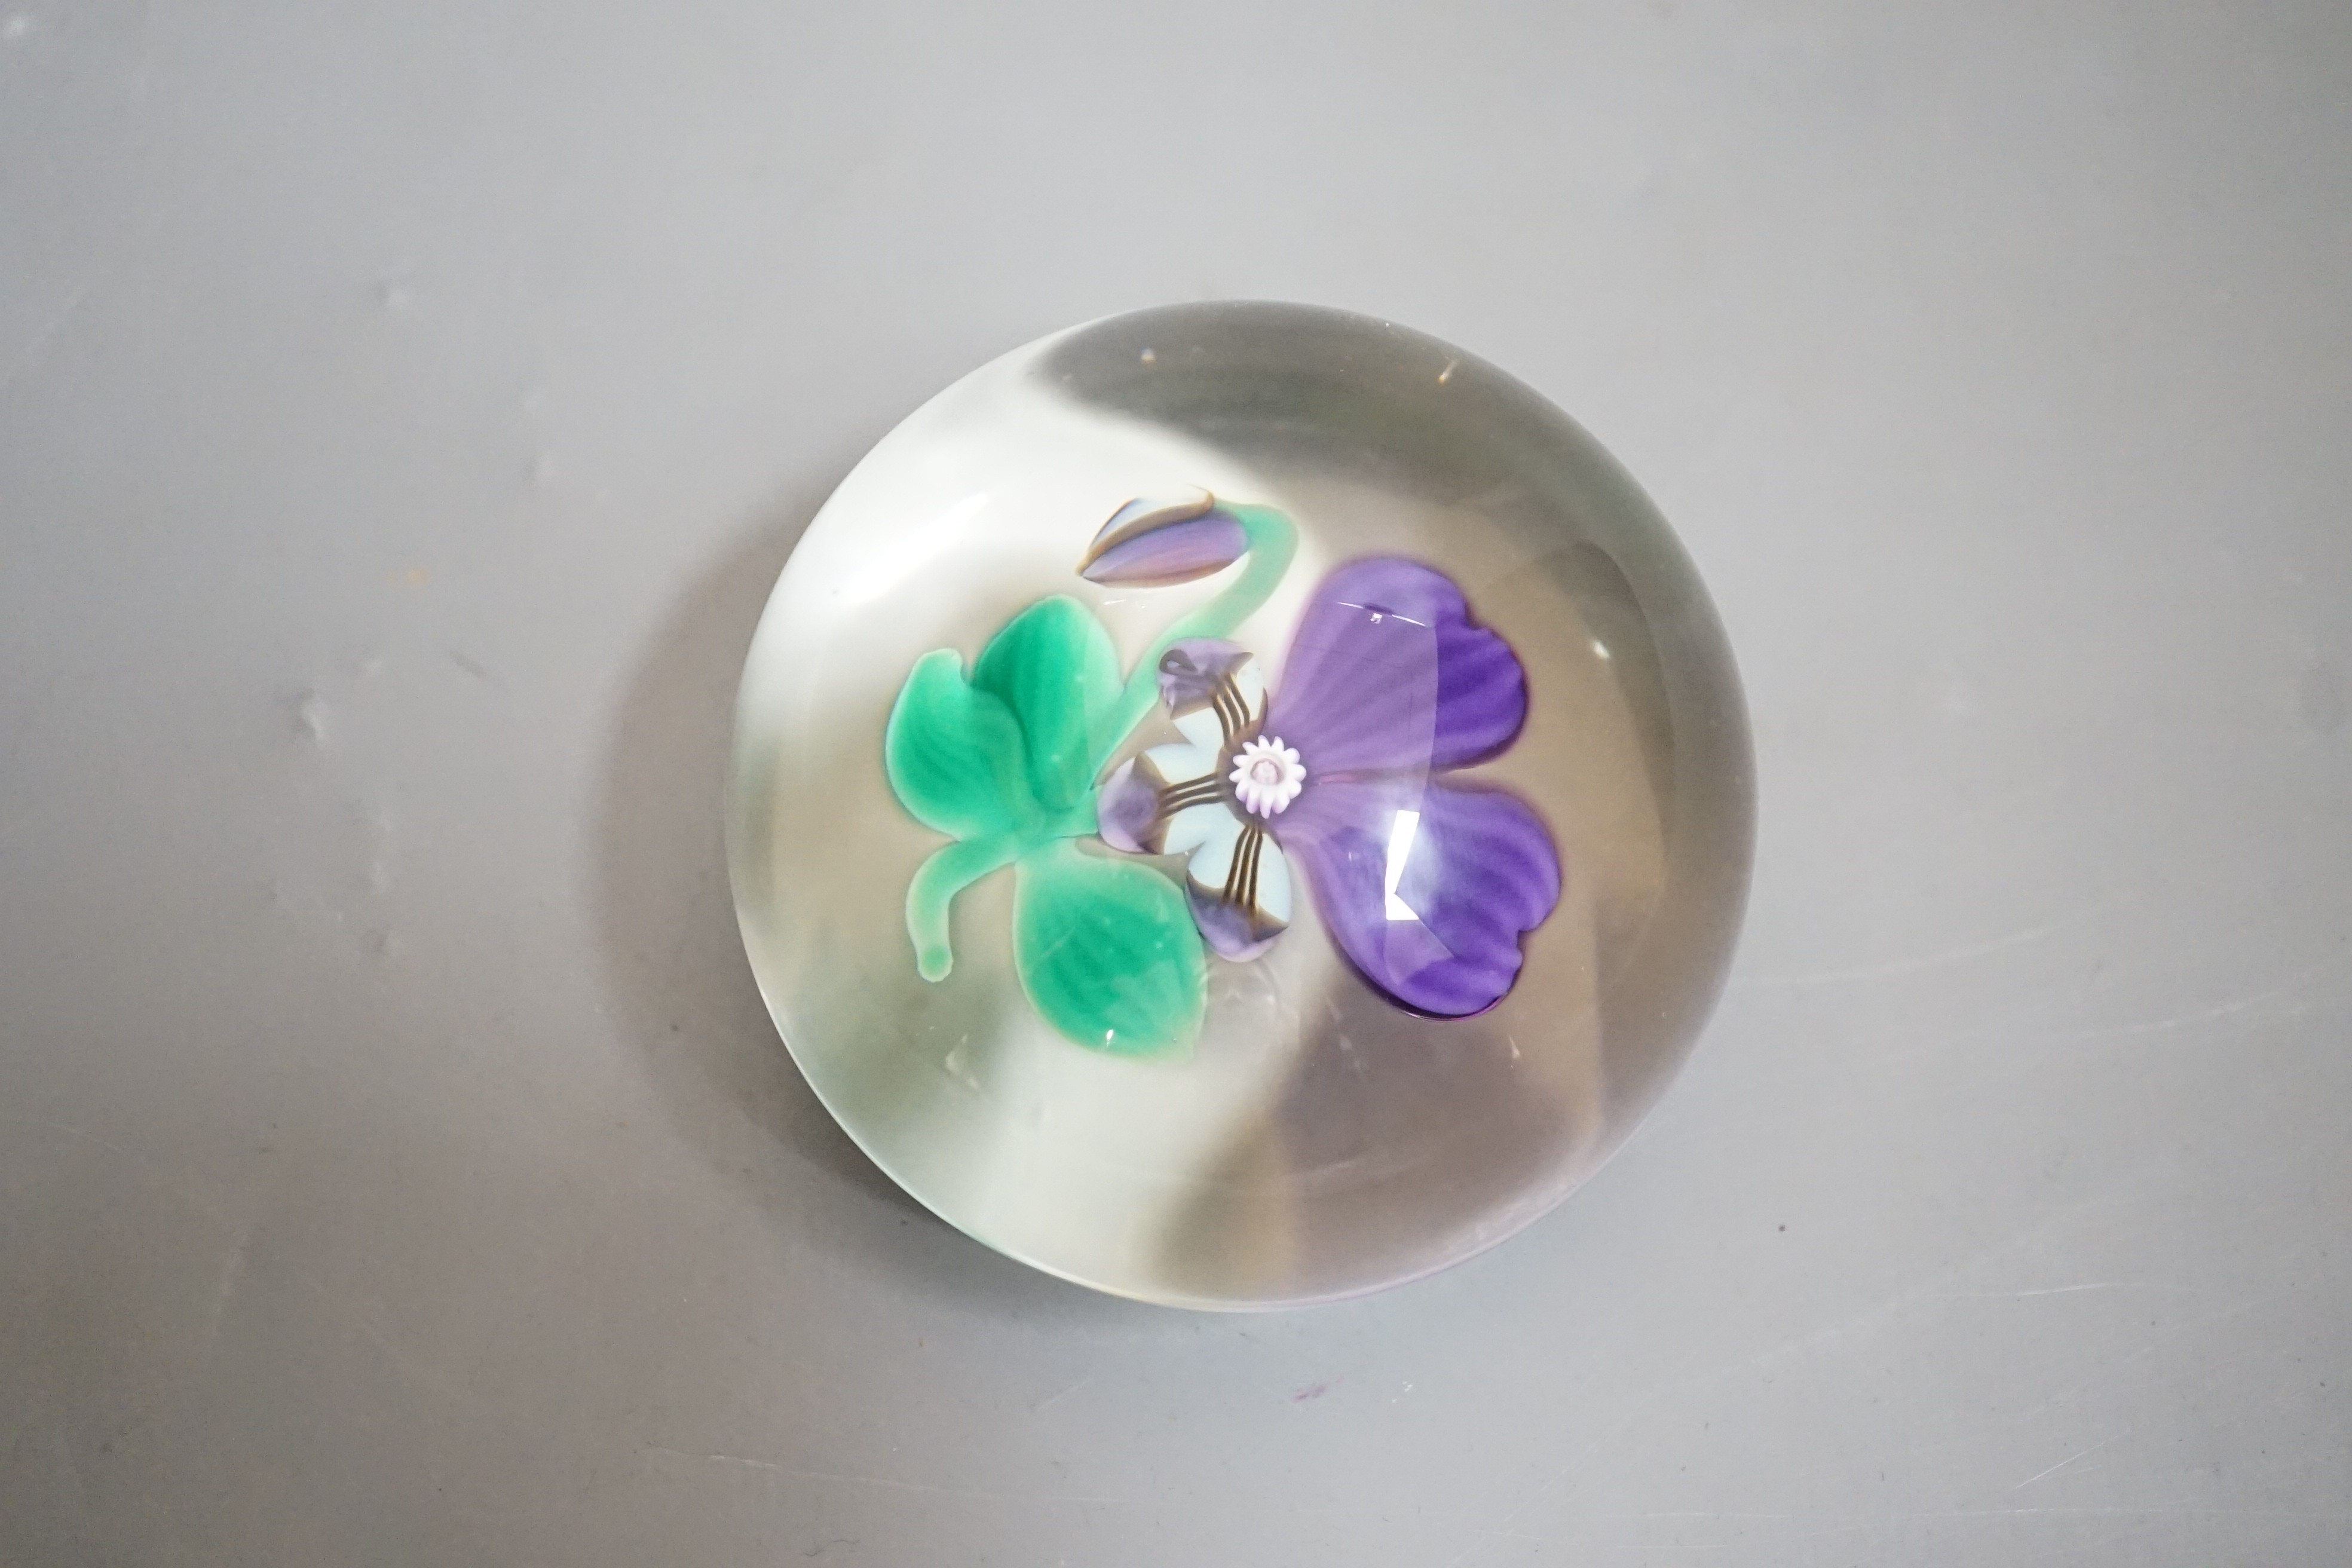 An SGS purple pansy small paperweight, no.108/500, dated 1999